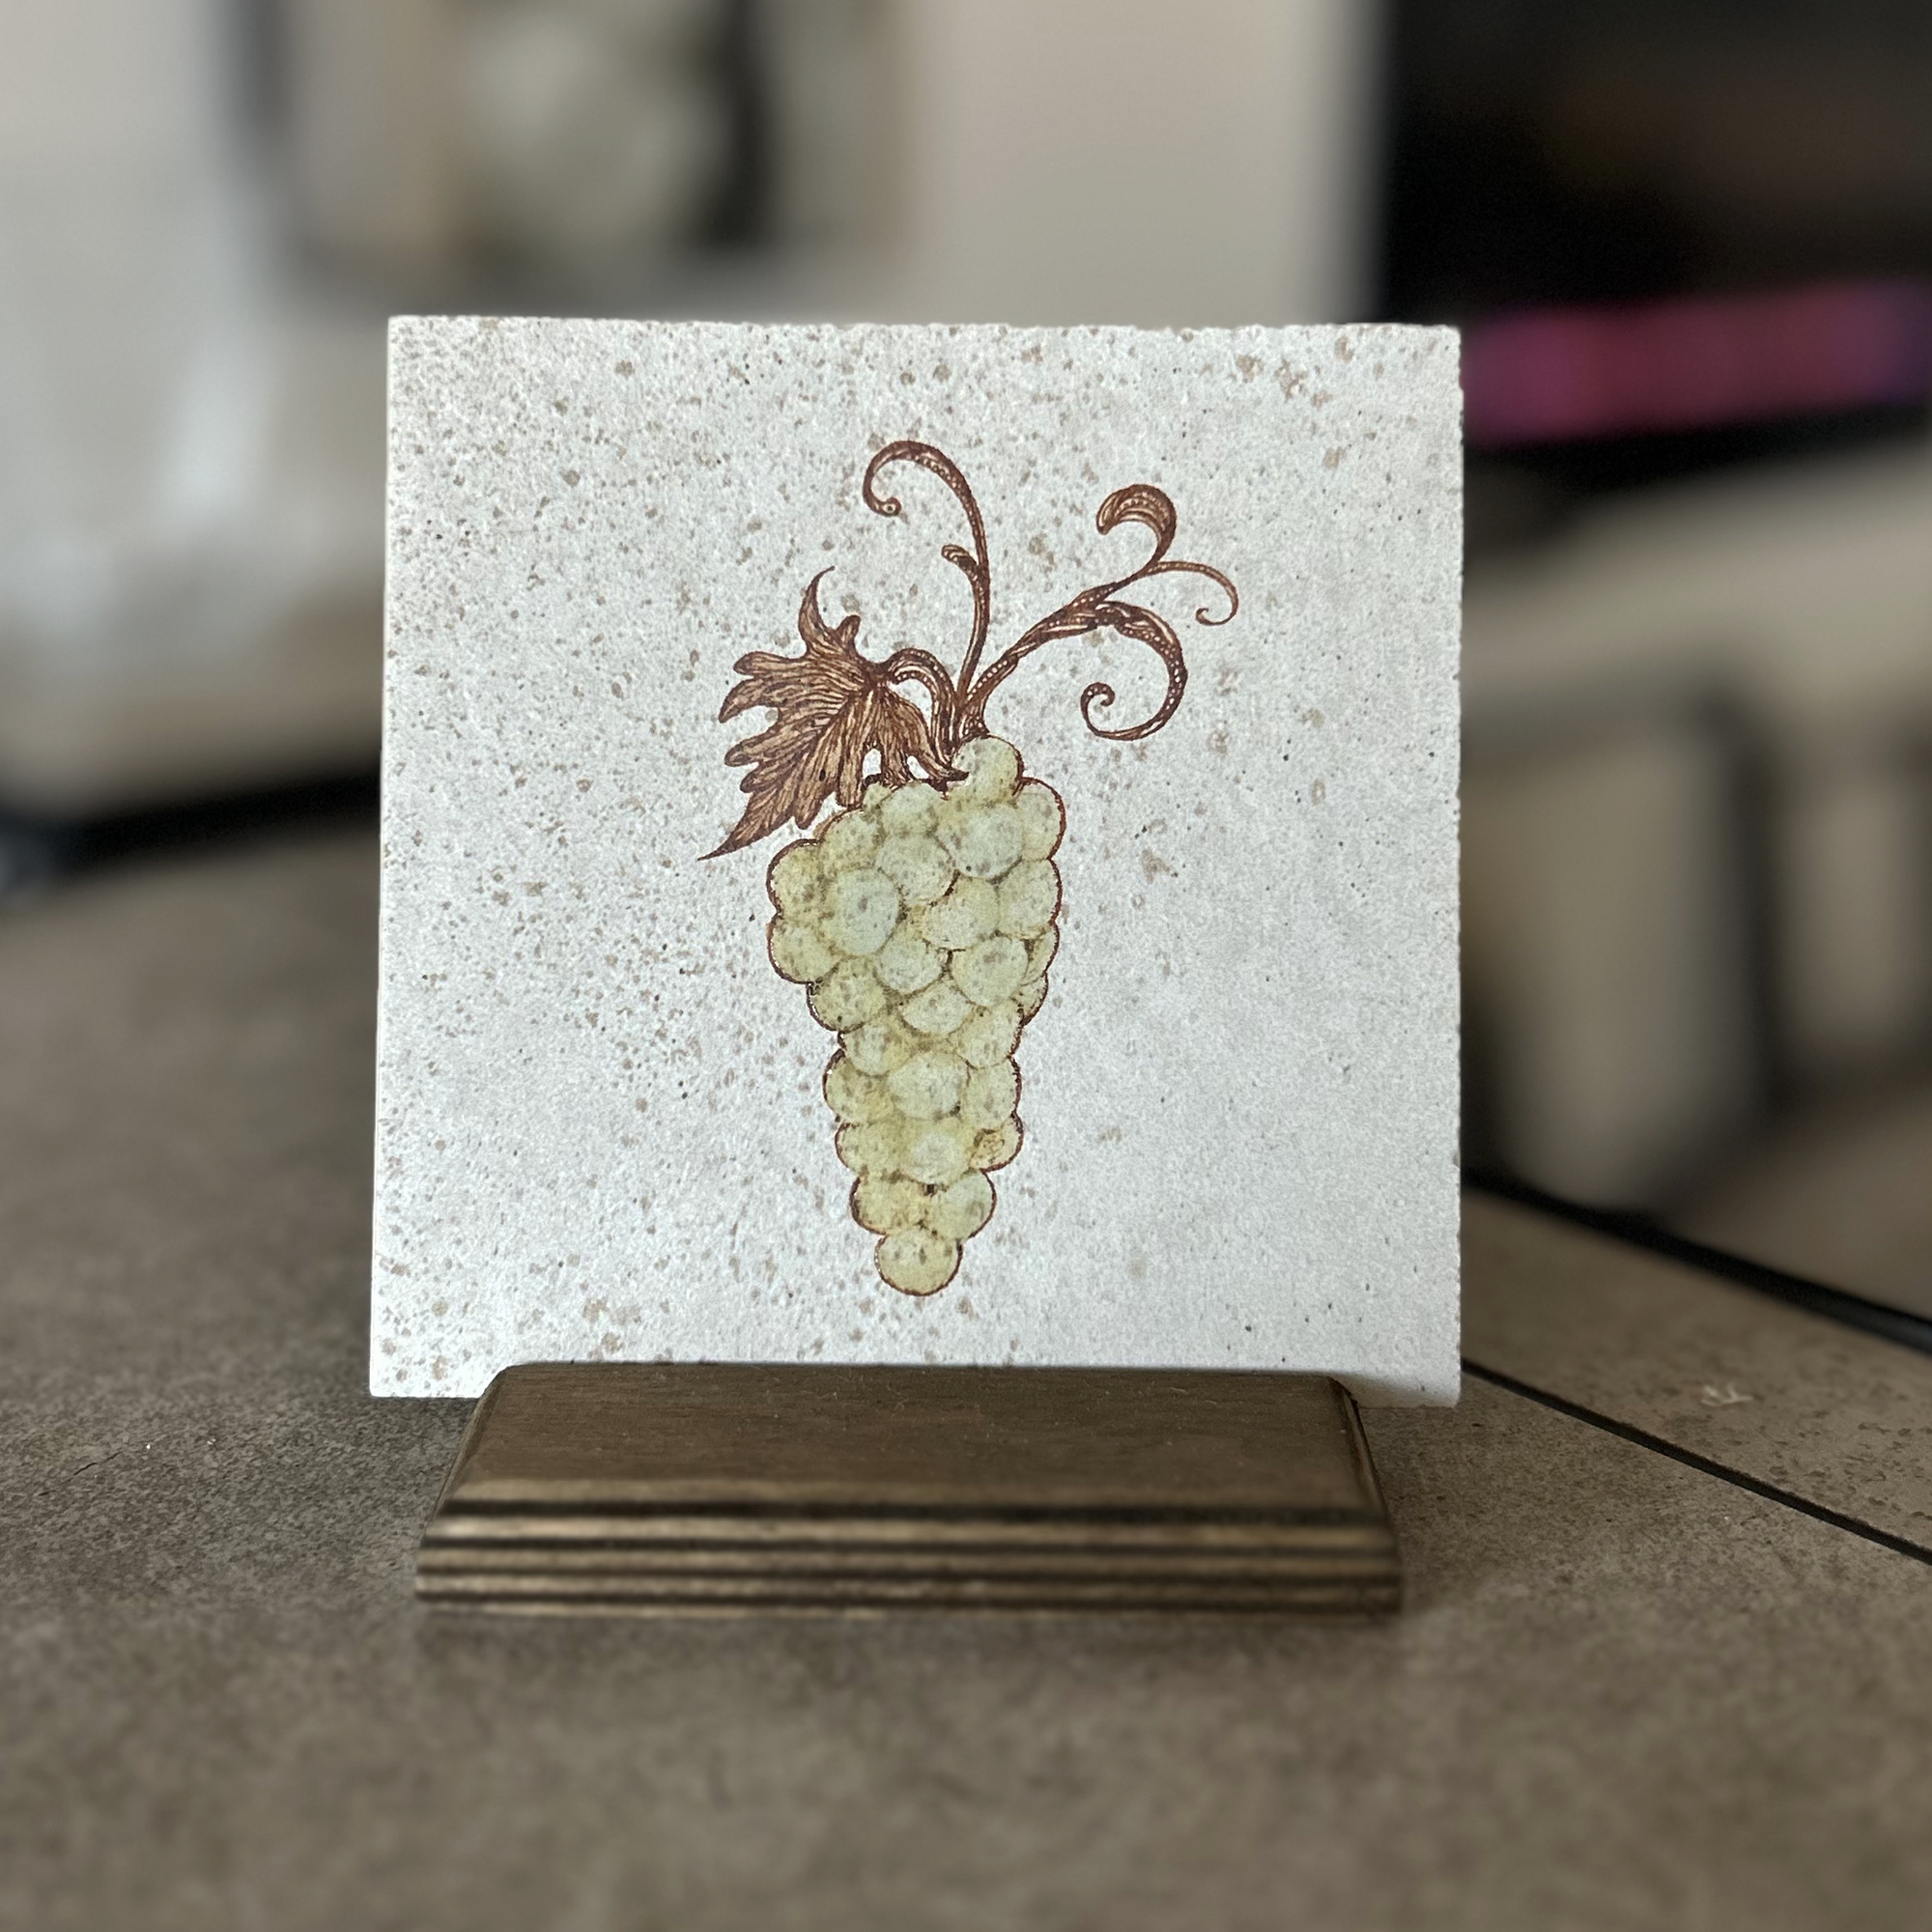 Original design glazed green grapes on beige variegated porcelain tile displayed on a earth stain baltic birch stand